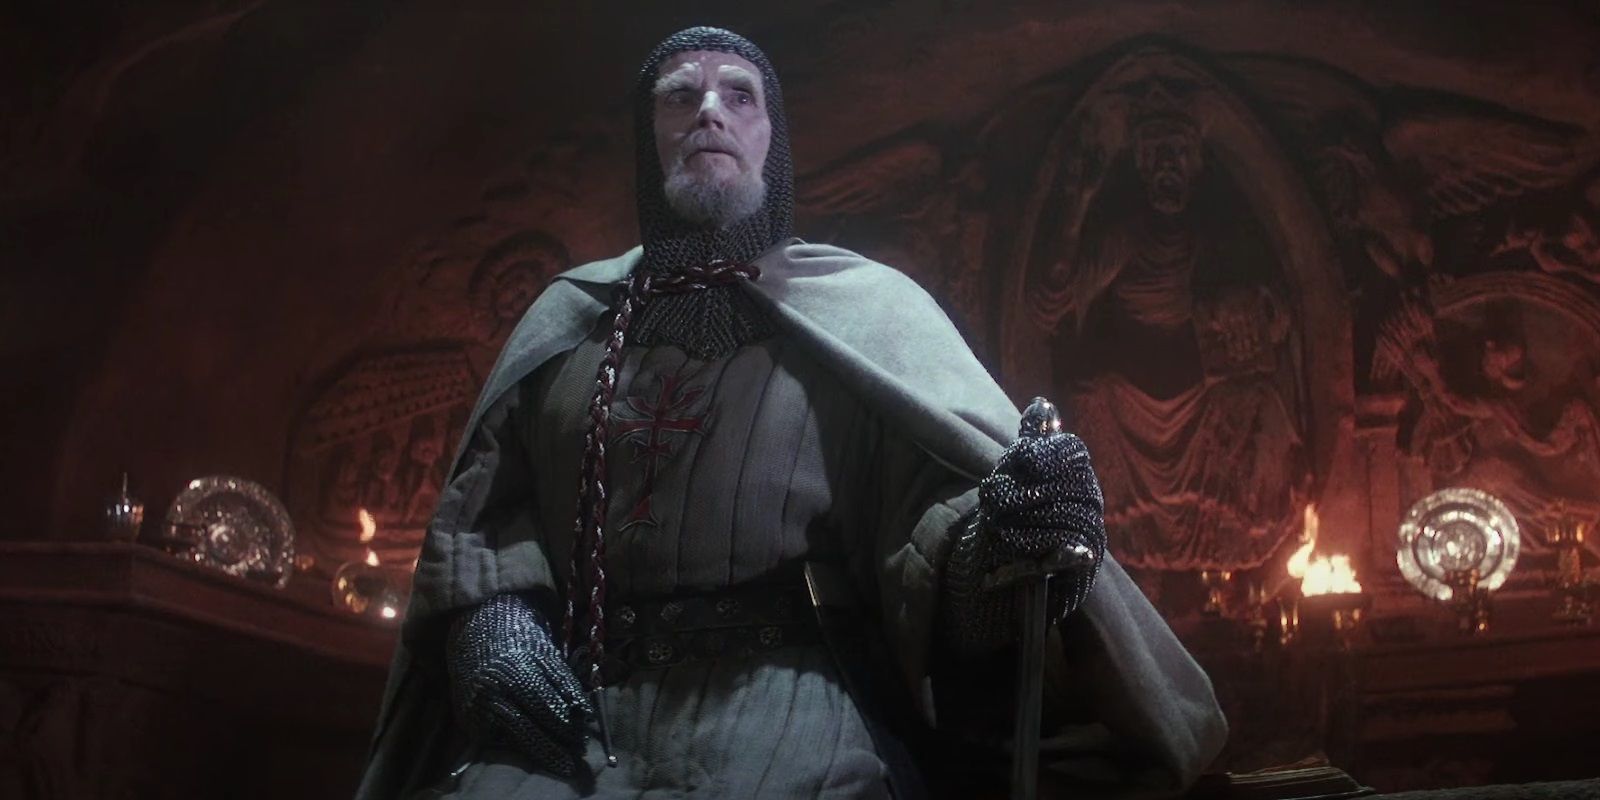 The Grail Knight in Indiana Jones and the Last Crusade